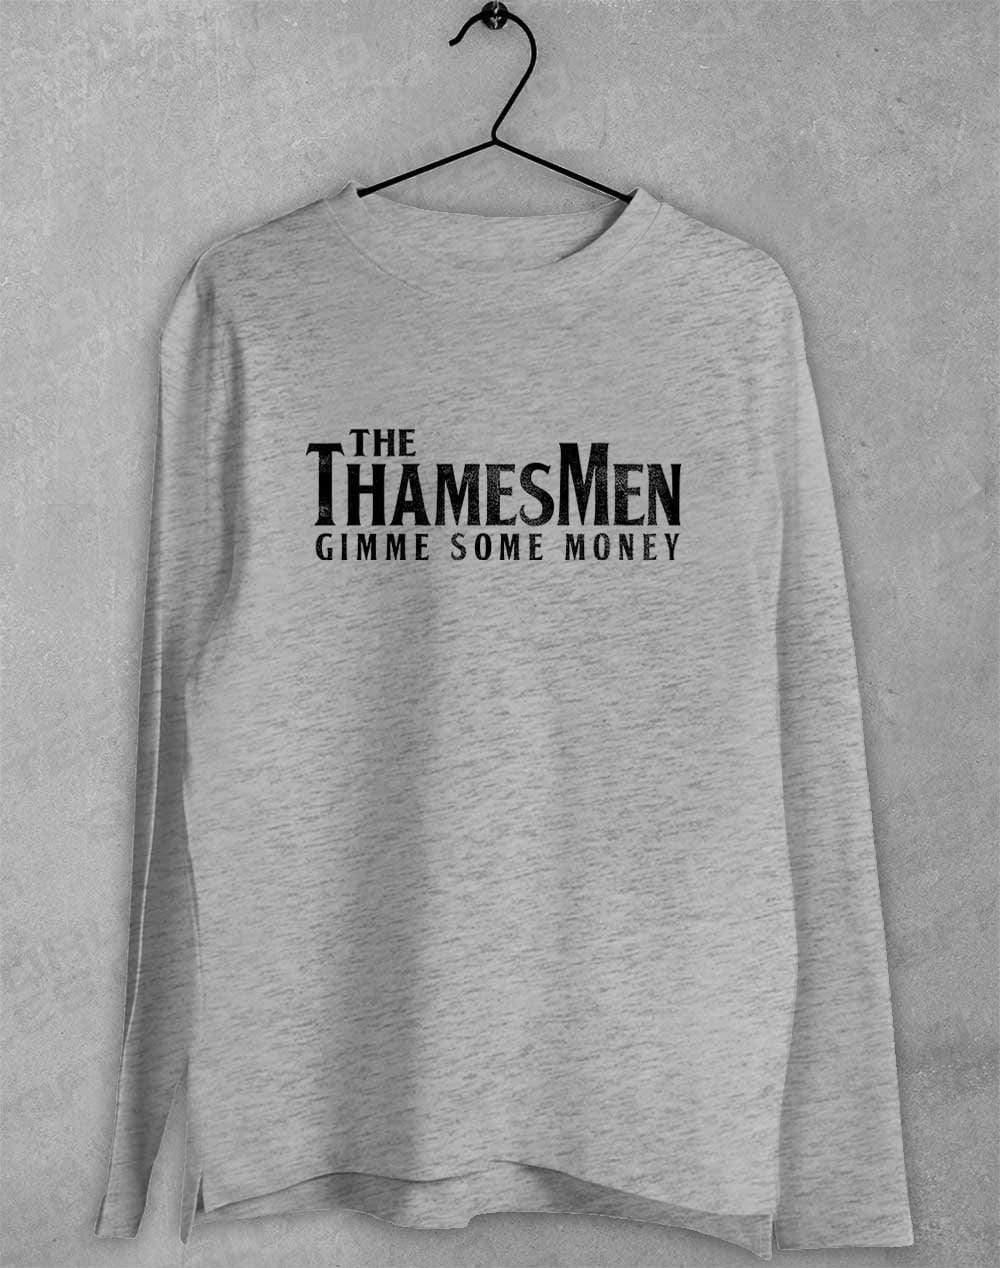 The Thamesmen Gimme Some Money Long Sleeve T-Shirt S / Sport Grey  - Off World Tees